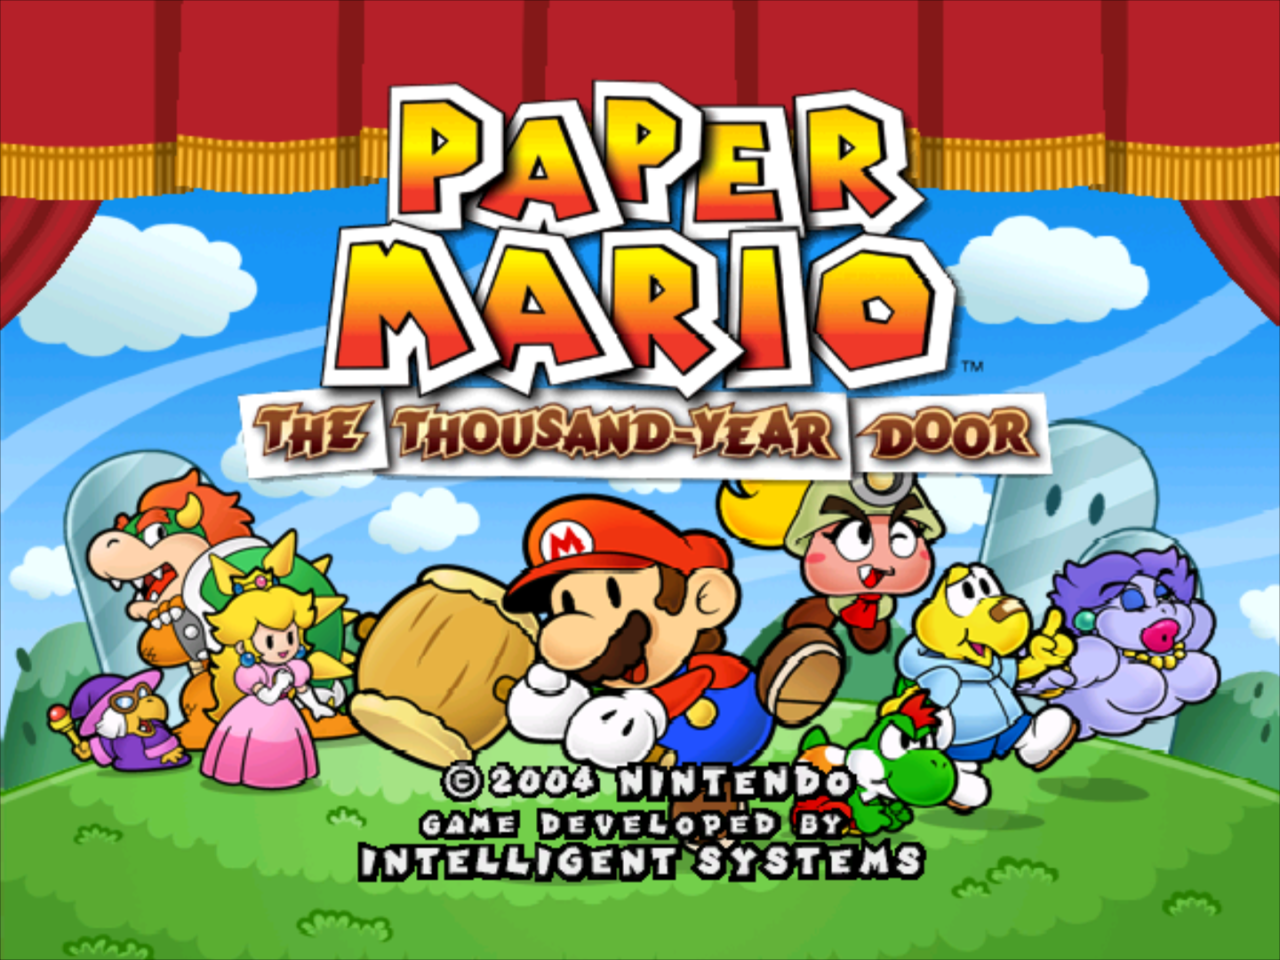 Paper Mario: The Thousand-Year Door 3D hoax explained - Pure Nintendo.